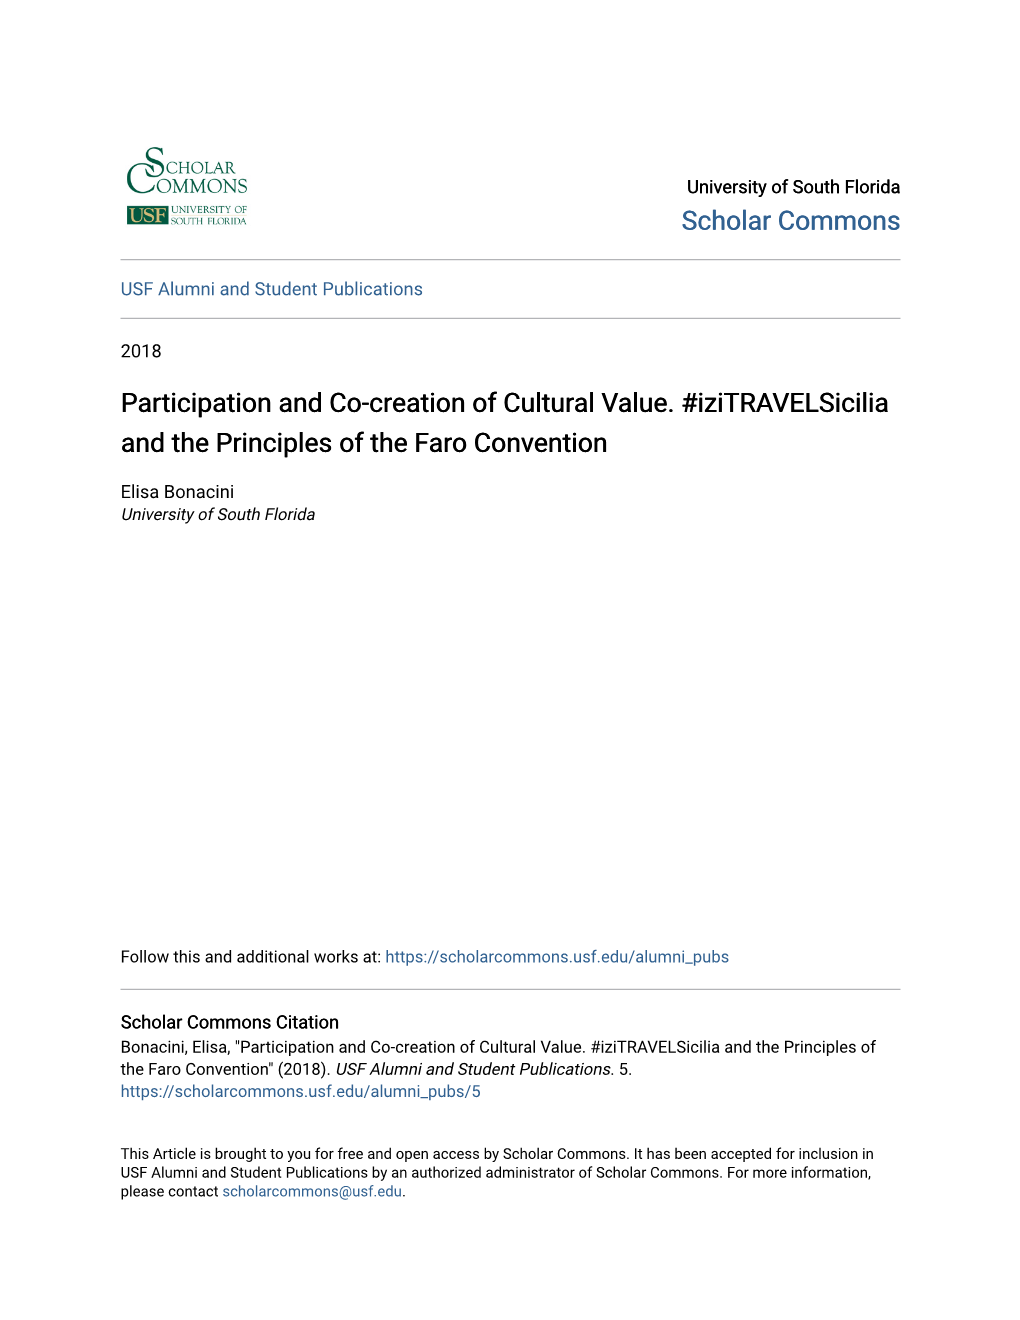 Participation and Co-Creation of Cultural Value. #Izitravelsicilia and the Principles of the Faro Convention